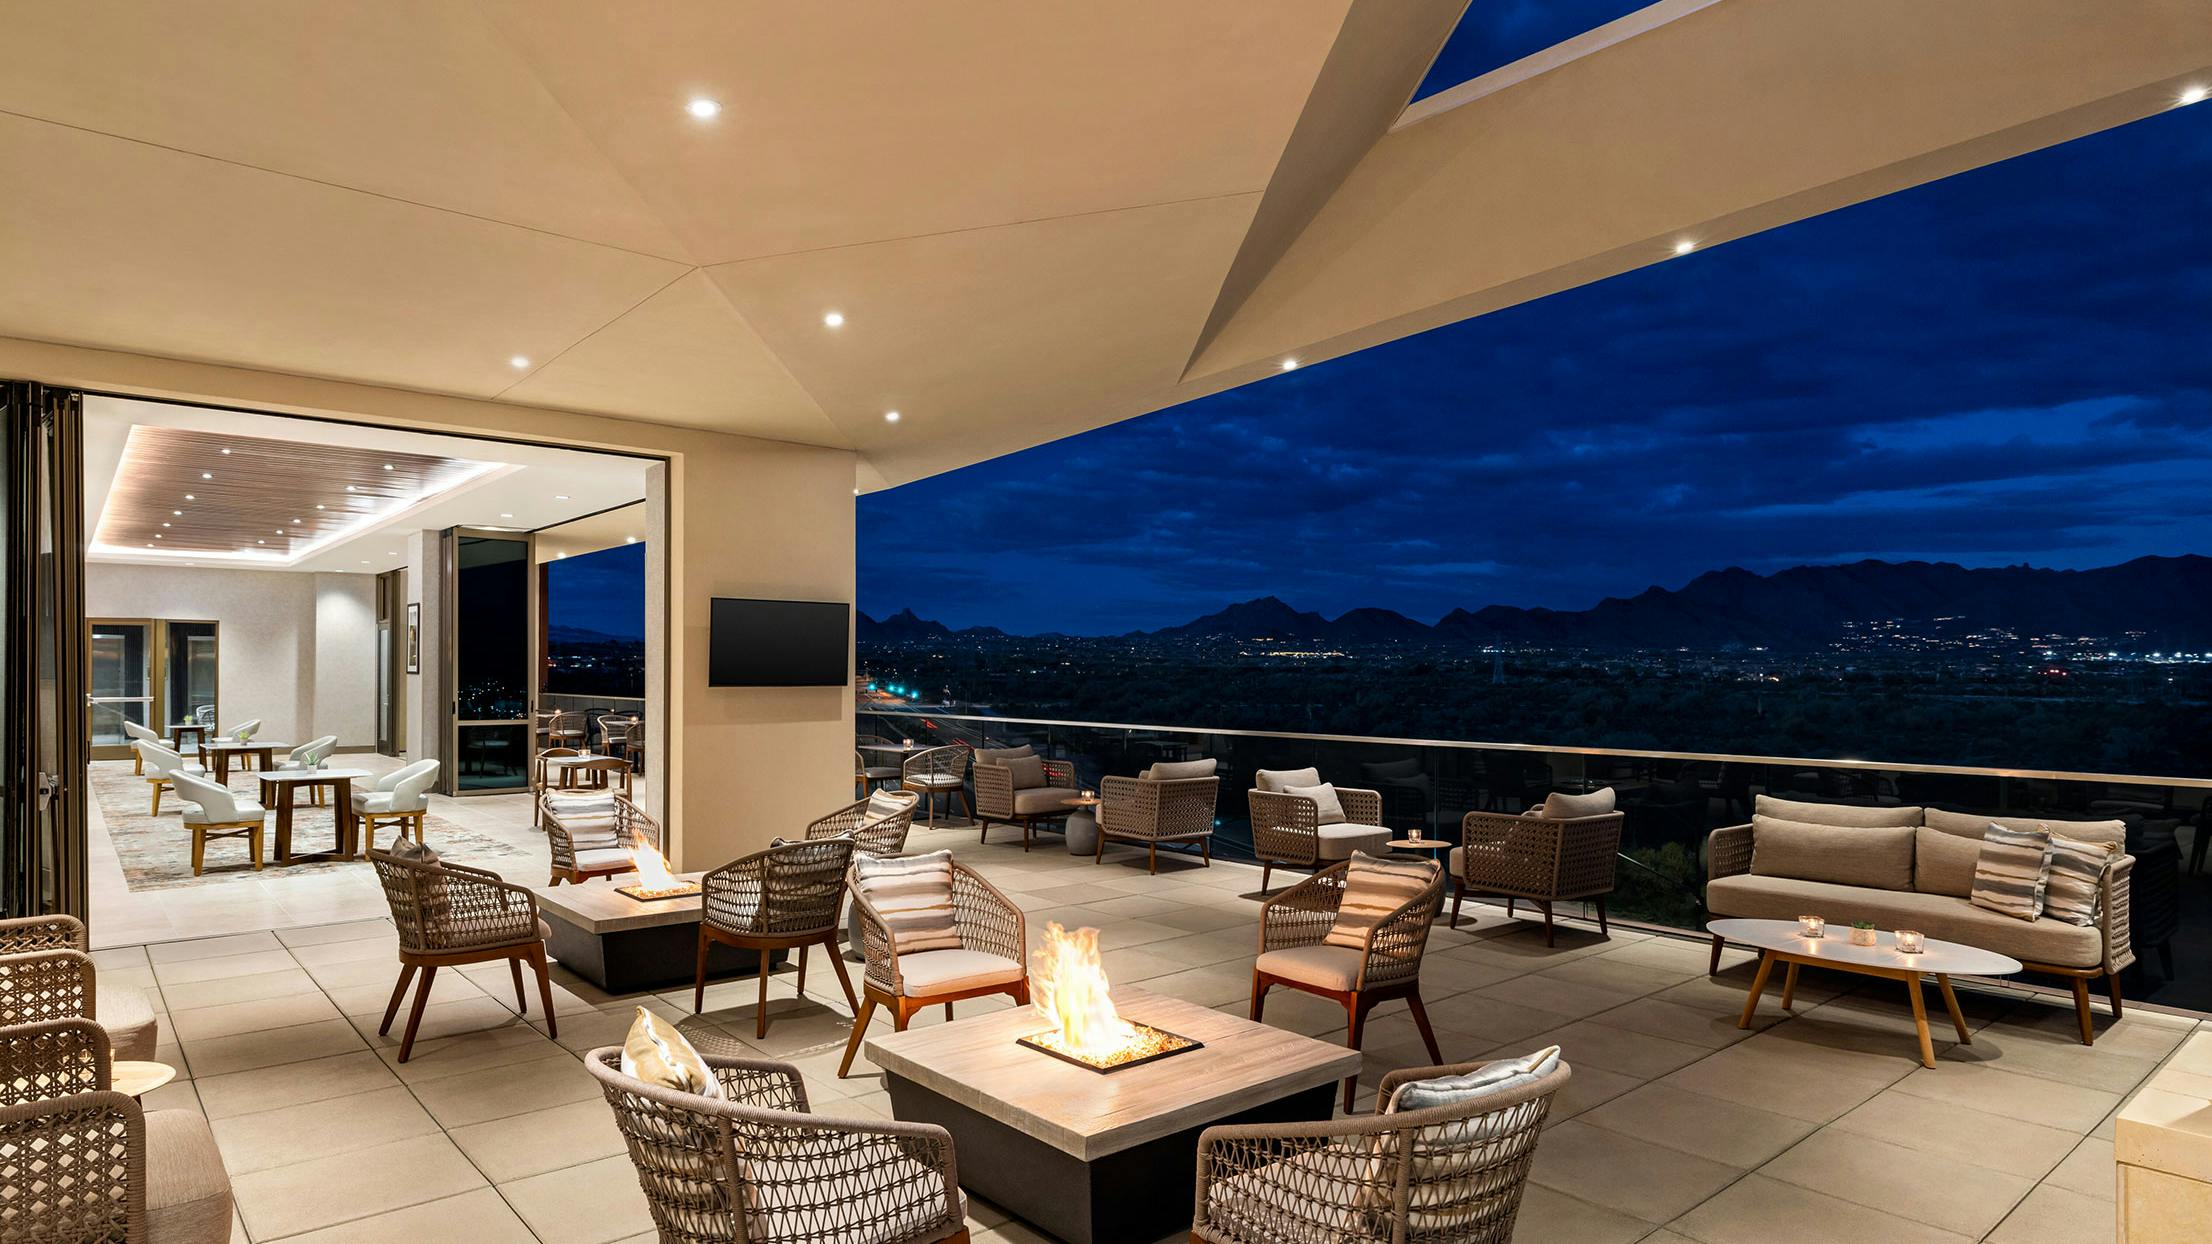 Hilton roof top lounge with a fire pit and a view of the mountains, enhanced by stunning commercial glass walls